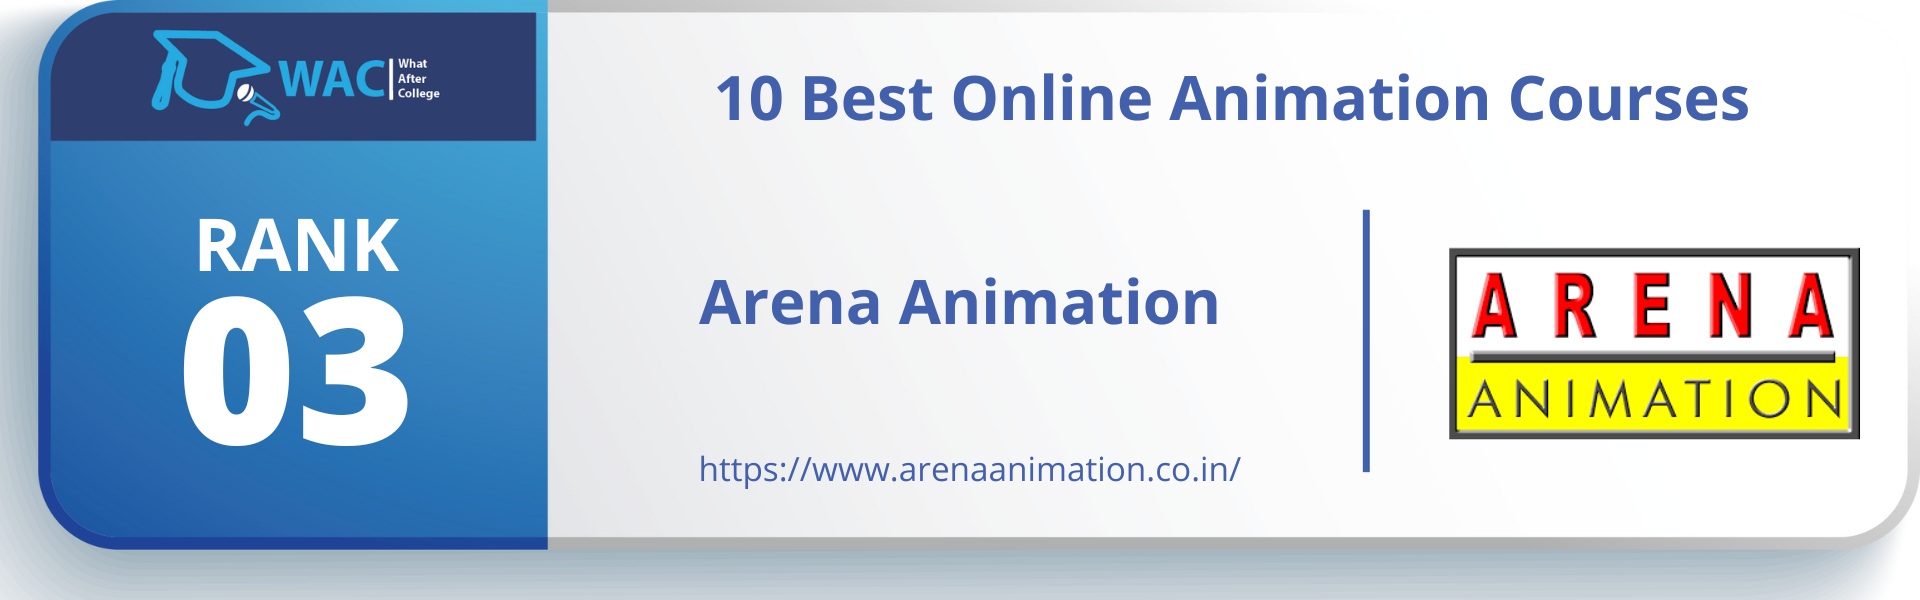 Online Animation Courses